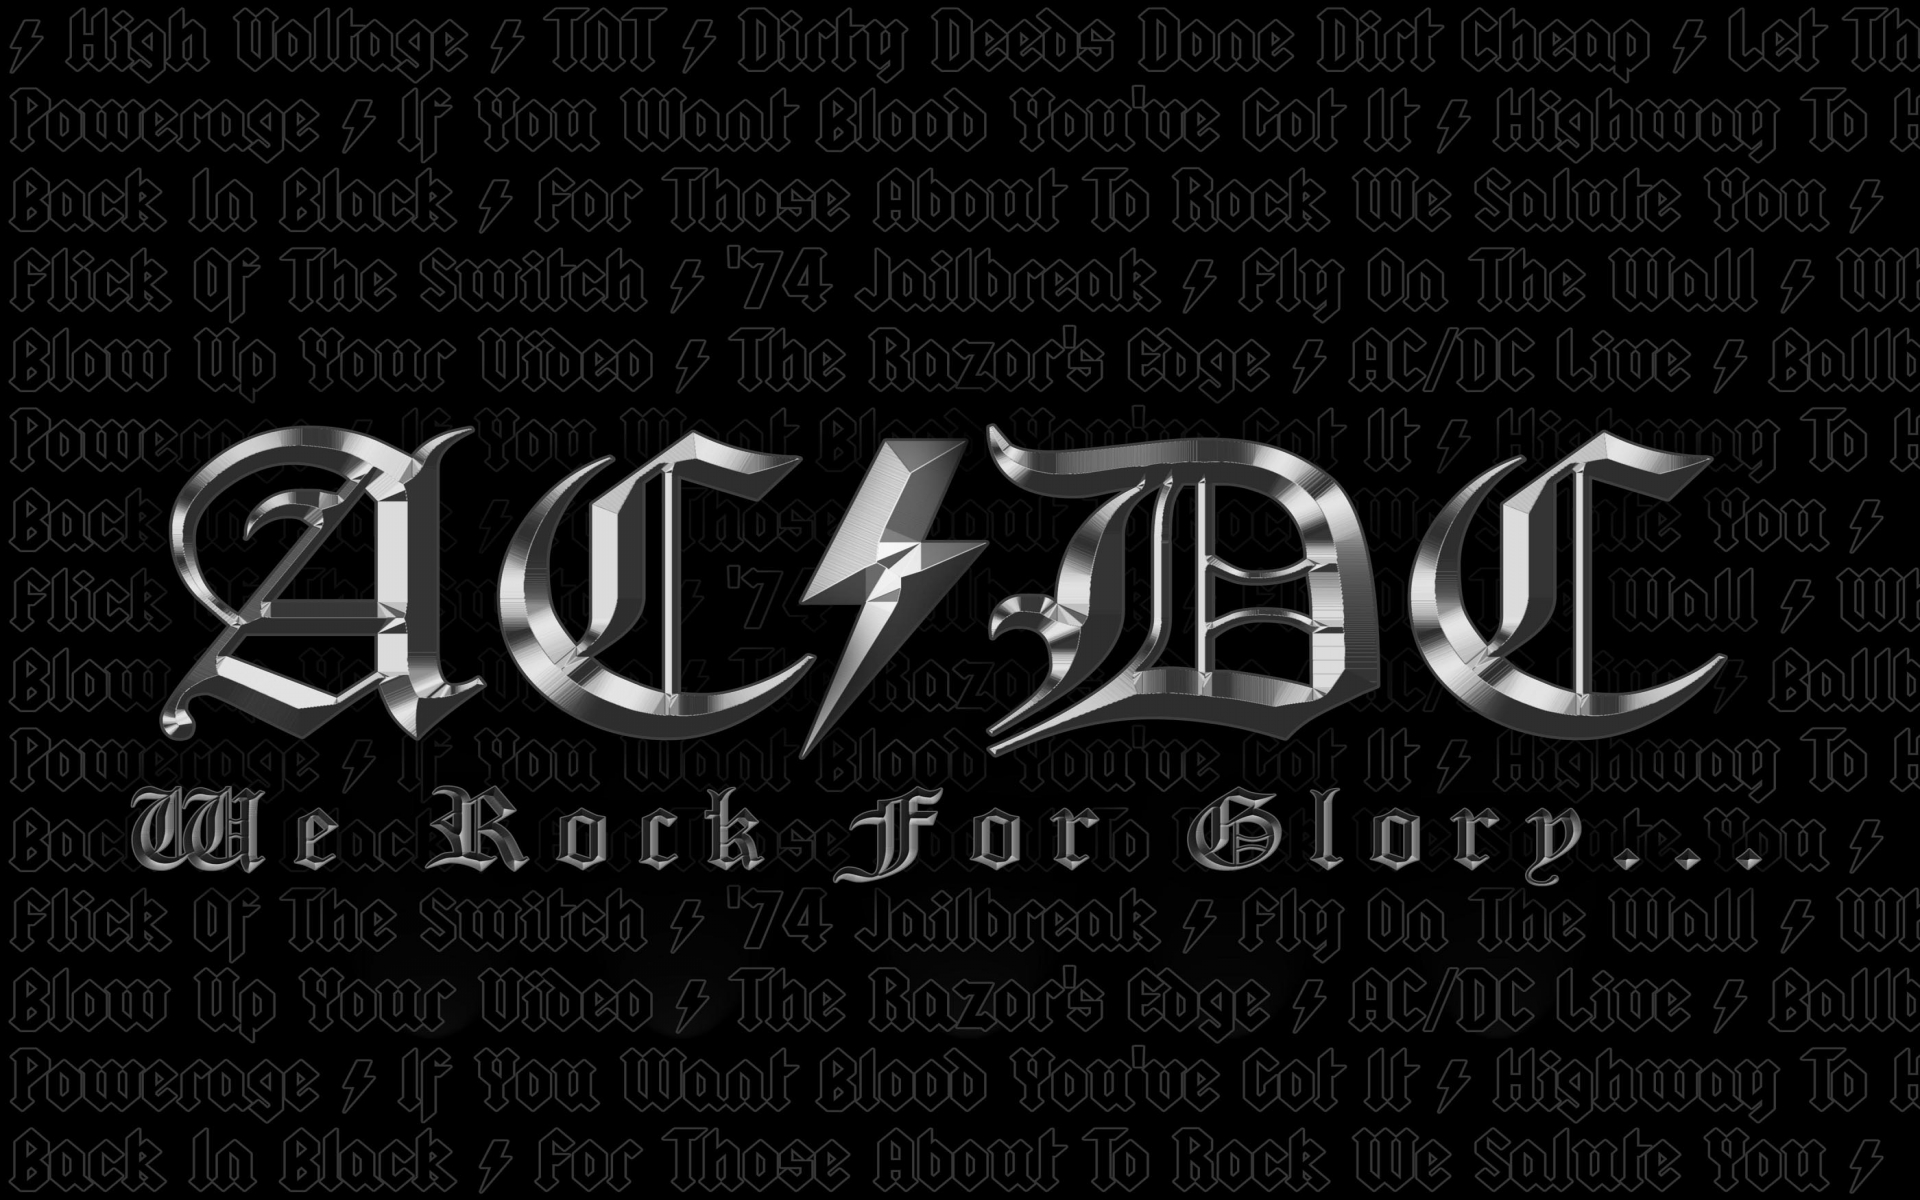 ac dc, Ac, Dc, Acdc, Heavy, Metal, Hard, Rock, Classic, Bands, Groups, Entertainment, Logo, Album, Covers Wallpaper